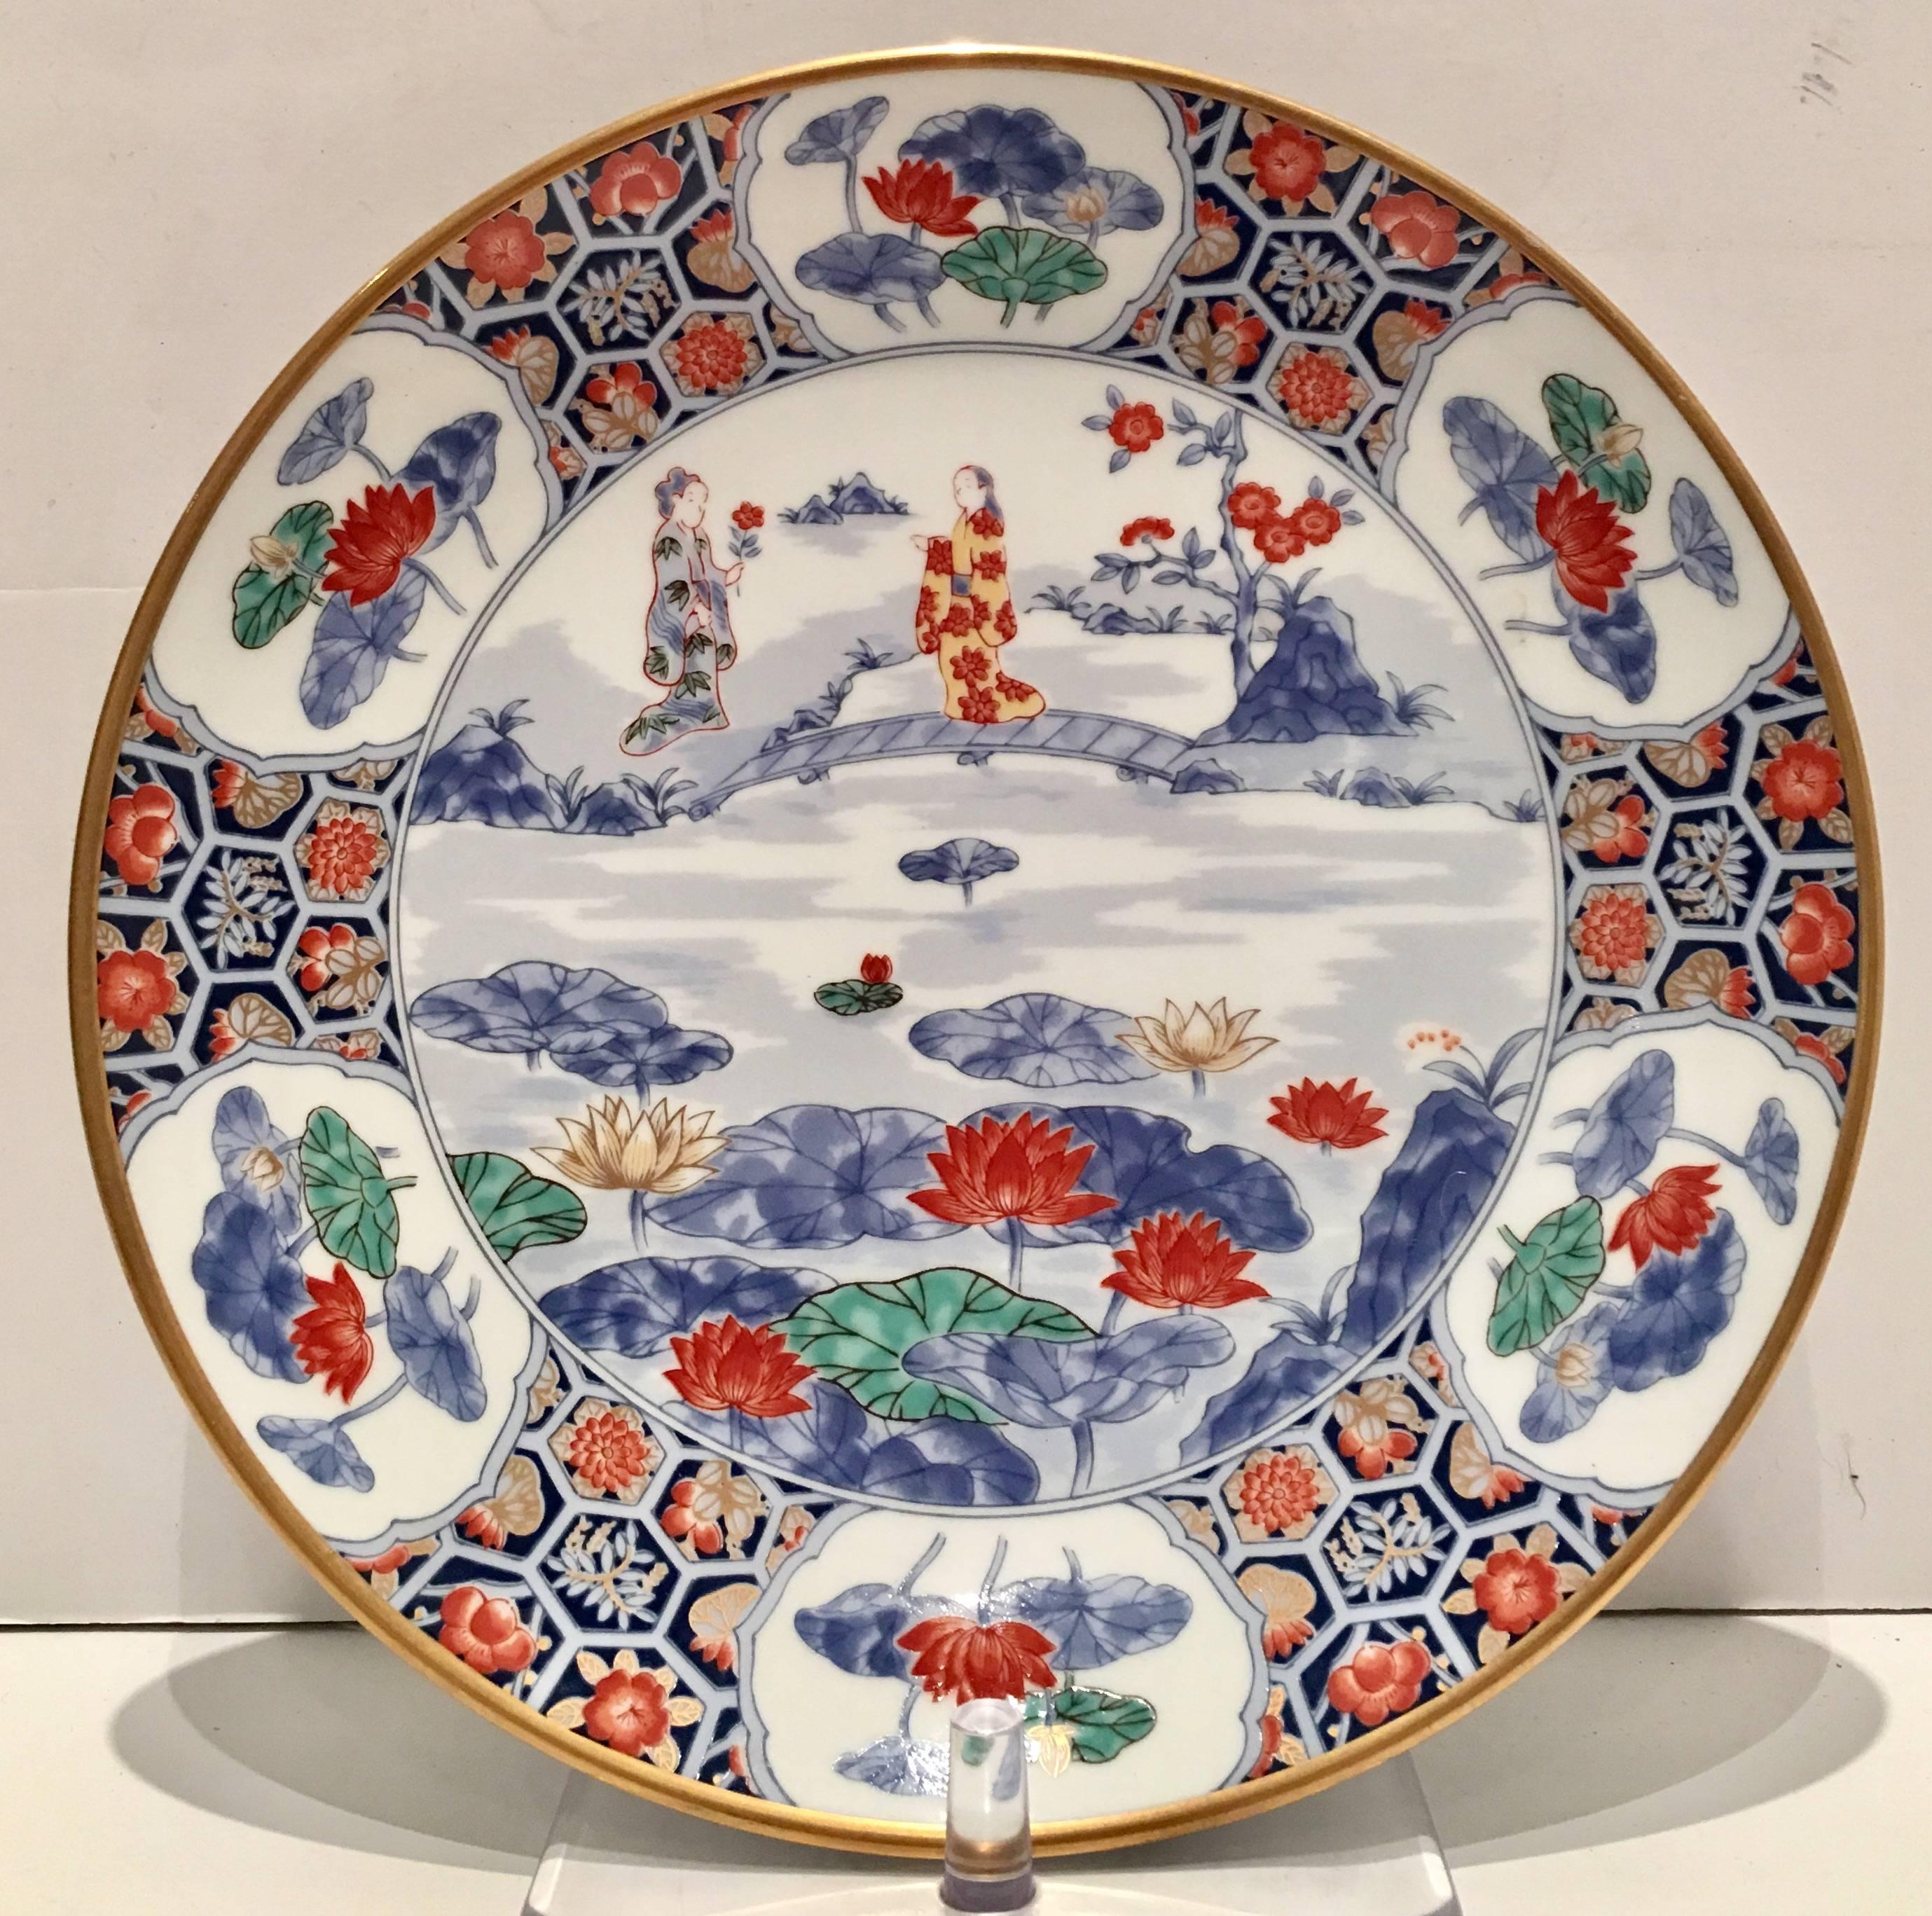 Midcentury unique set of Japanese porcelain with a gold rim geisha girl and cherry blossom motif hand painted plates.These Imari plates have a bright white ground and are decorated in gold, rust, blue, green and yellow with a 22K gold rim. Each